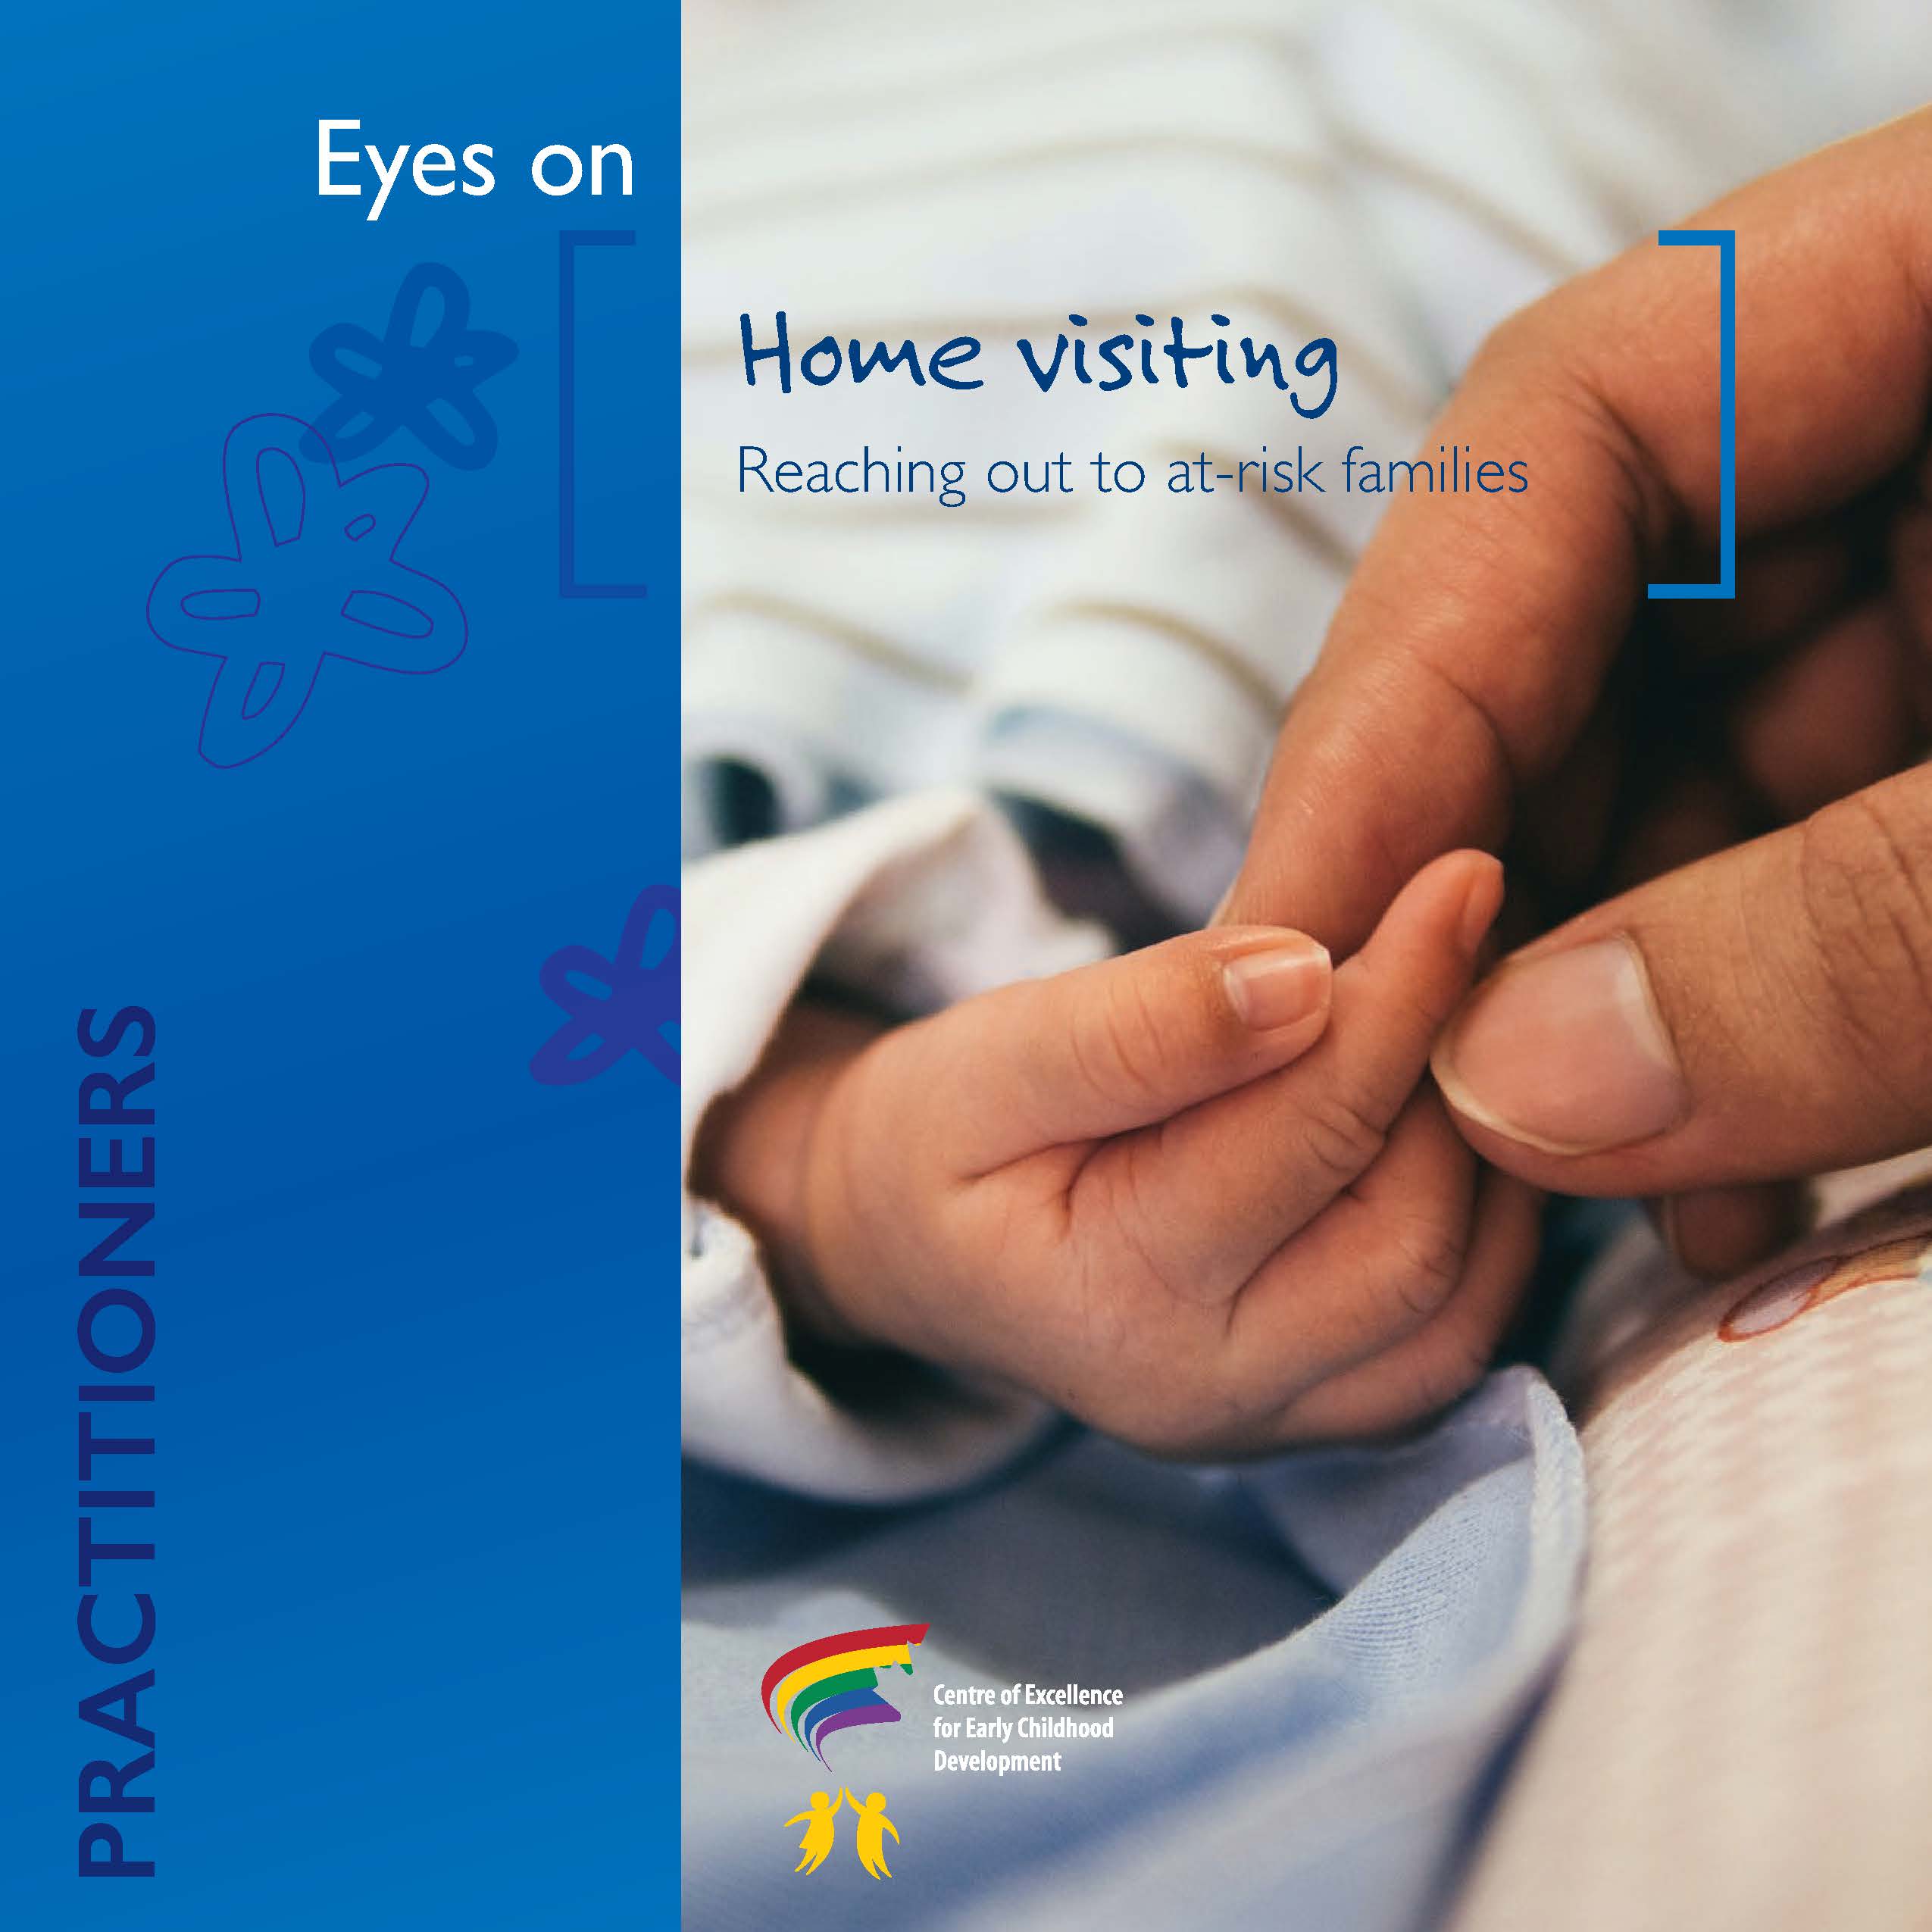 Home visiting : Home visiting: Reaching out to at-risk families